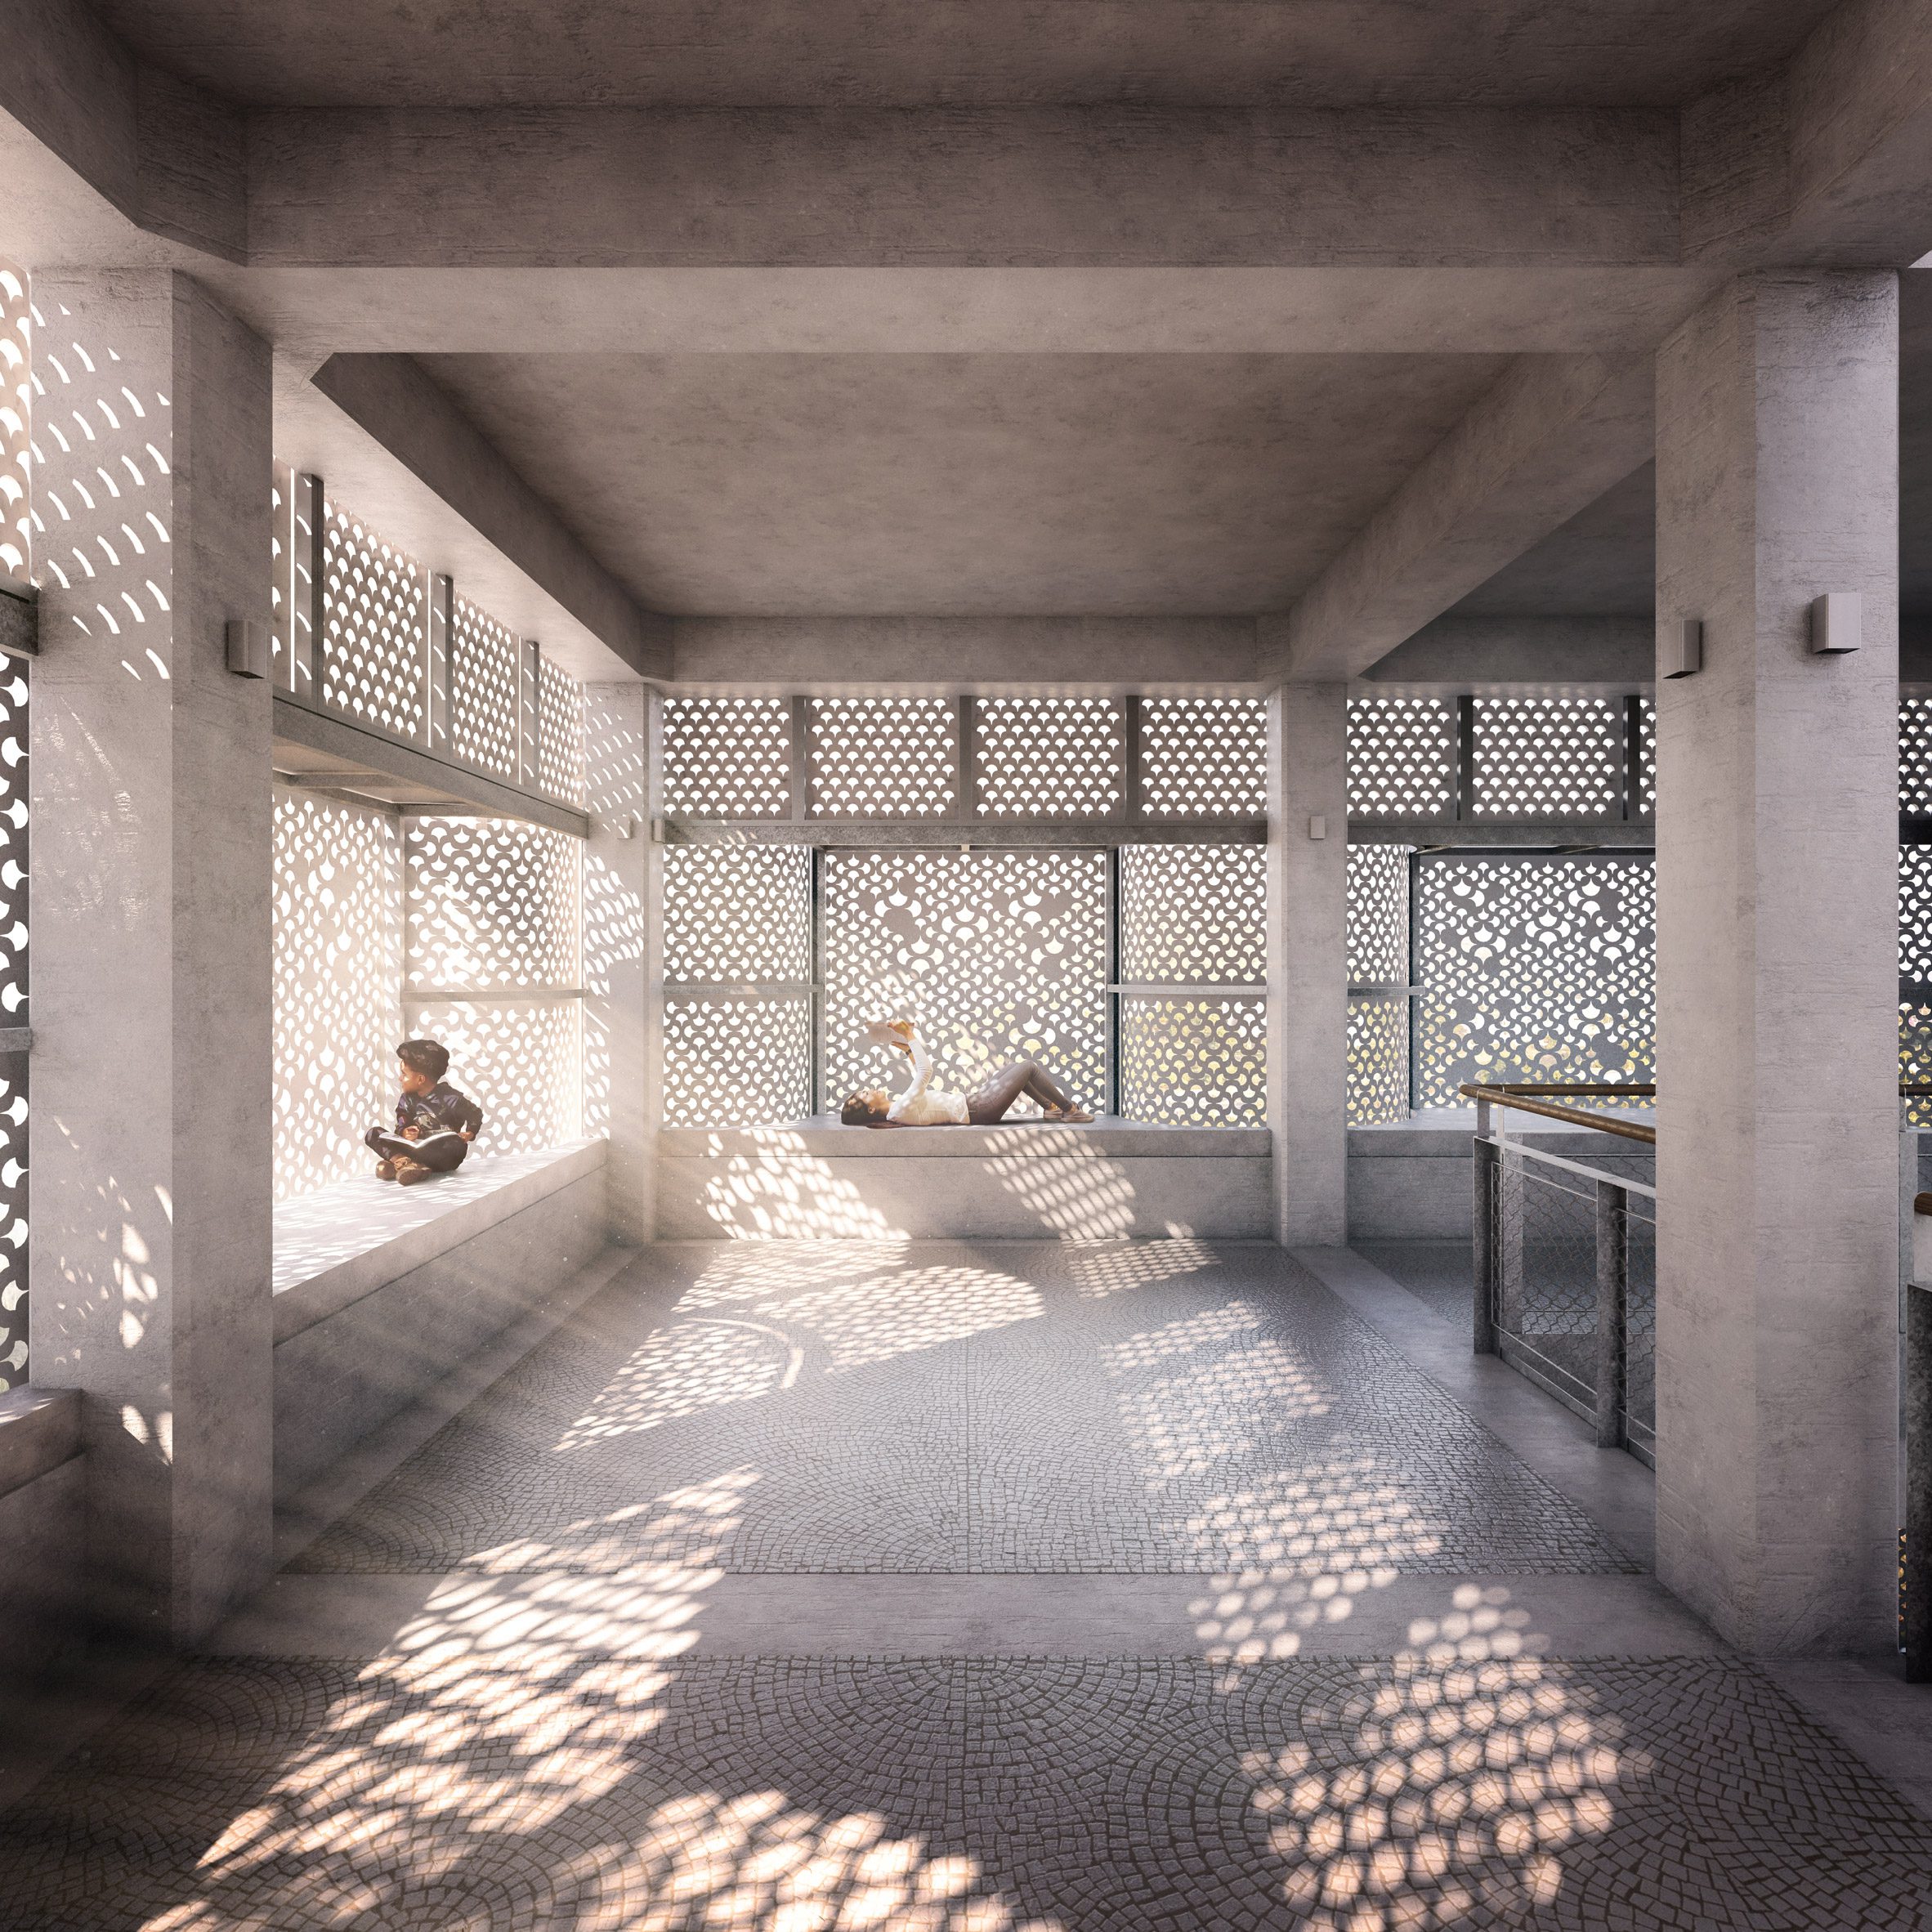 light filters through the perforated facade at Titled Third Space: The Haveli of Curiosity